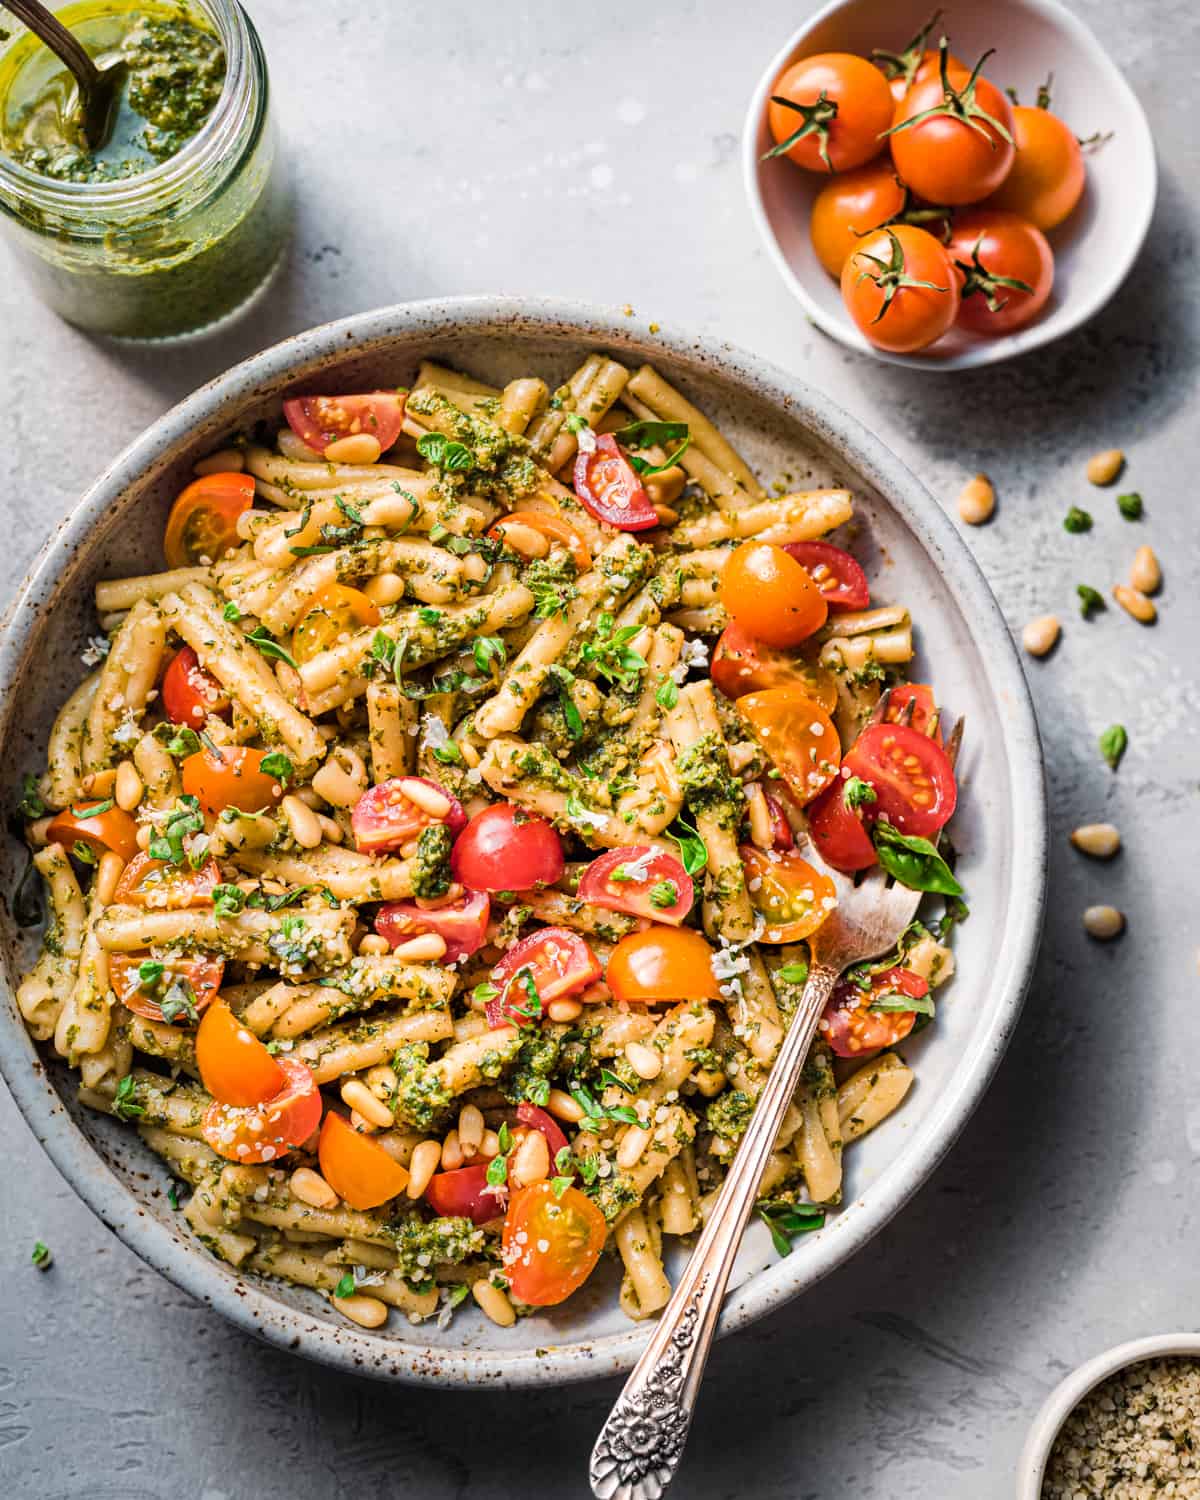 Overhead view of pesto pasta with tomatoes in a bowl on a grey table.